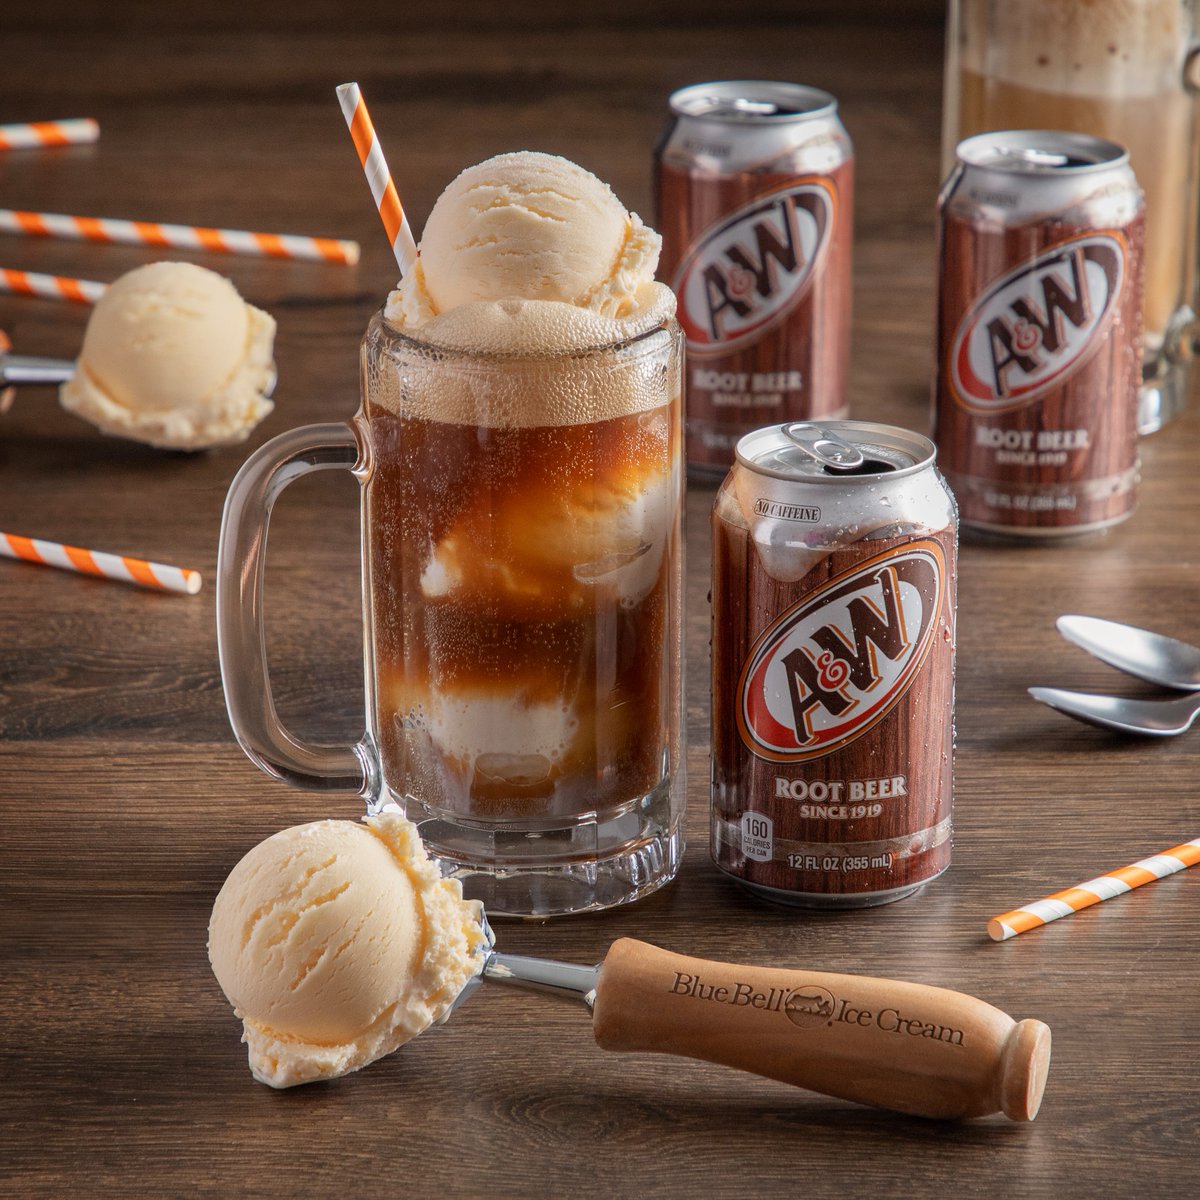 Let’s make a root beer float. 😀
#BlueBell #icecream #BlueBellIceCream #AWRootBeer #rootbeerfloat